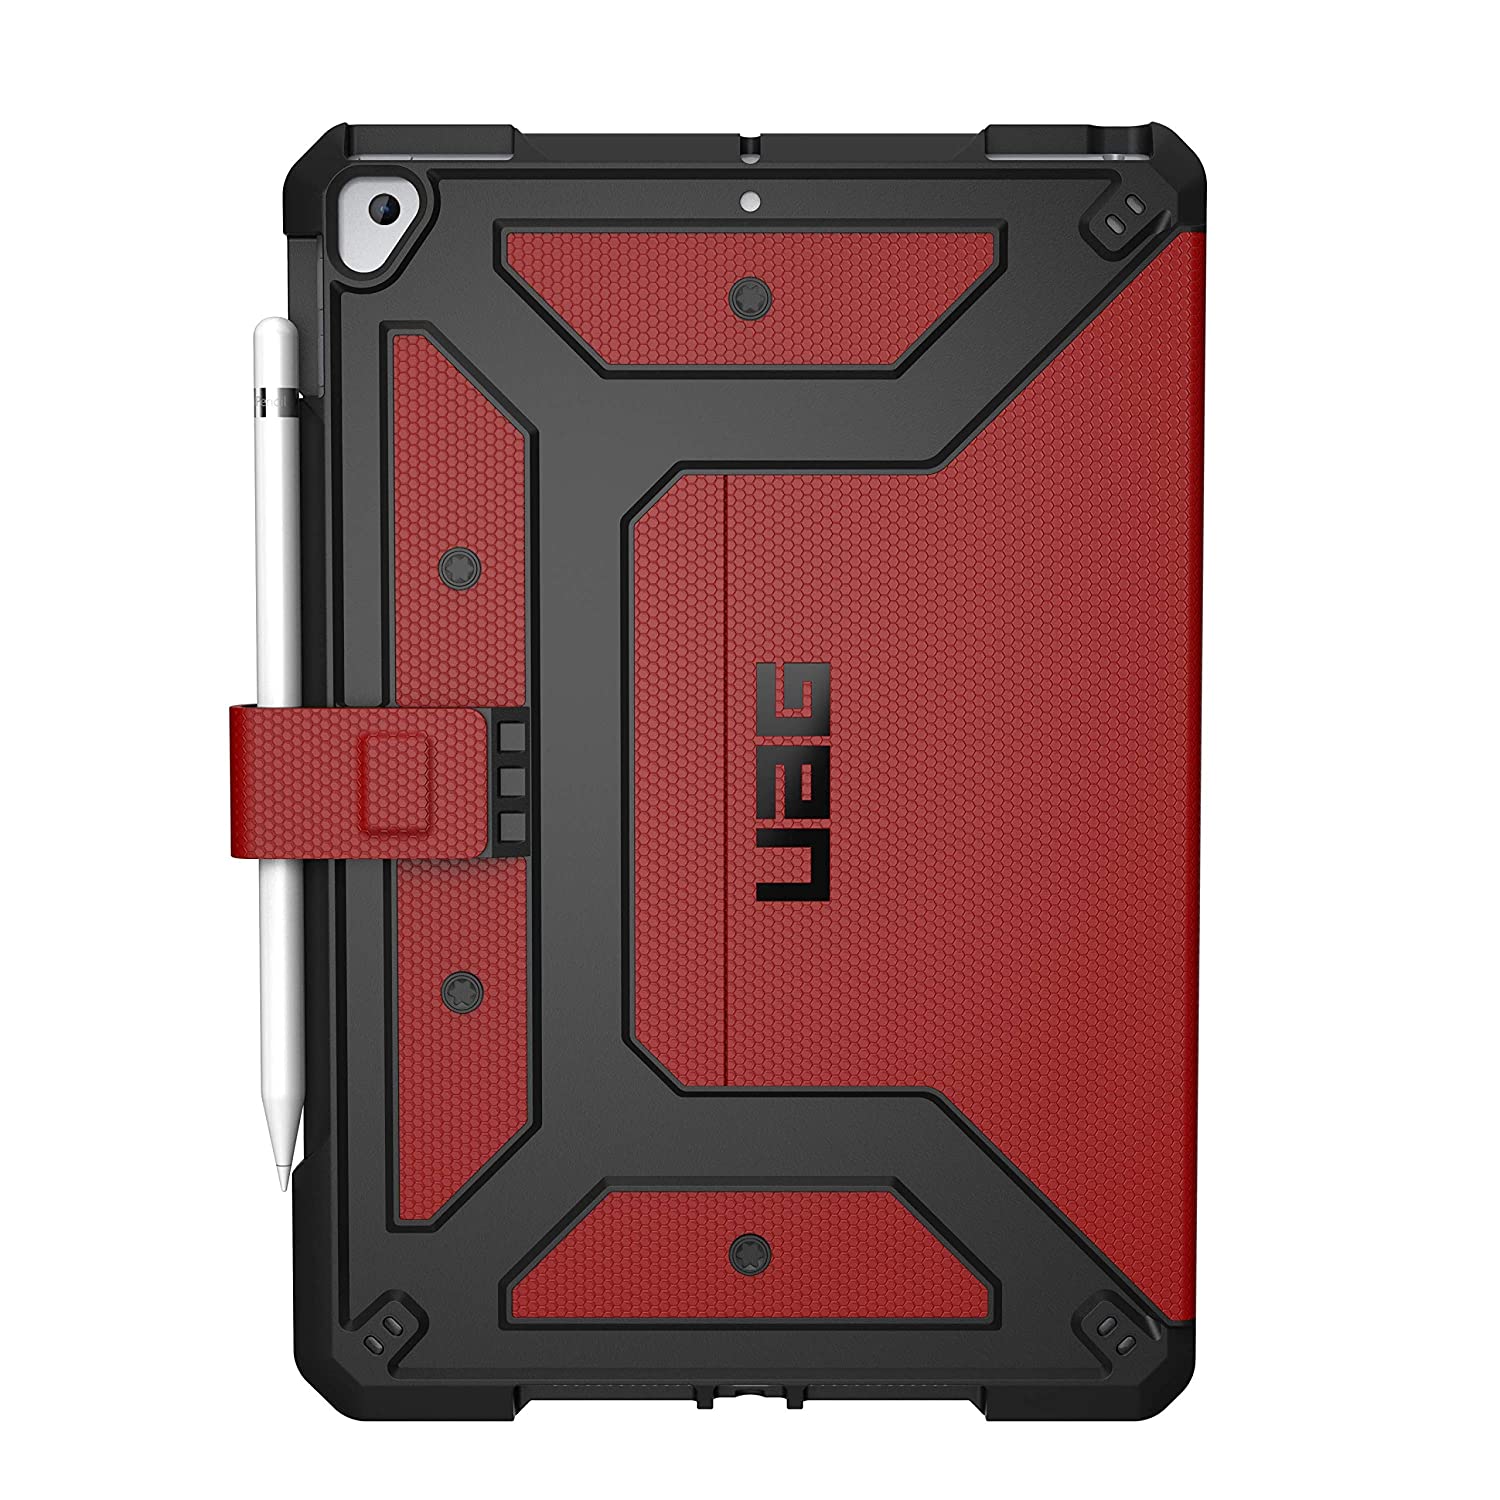 UAG iPad 10.2-inch (9th Gen, 2021) & (8th Gen, 2020) Case, Metropolis Rugged Heavy Duty Protective Cover Multi-Angle Viewing Folio Stand with Pencil Holder, Magma - image 2 of 8